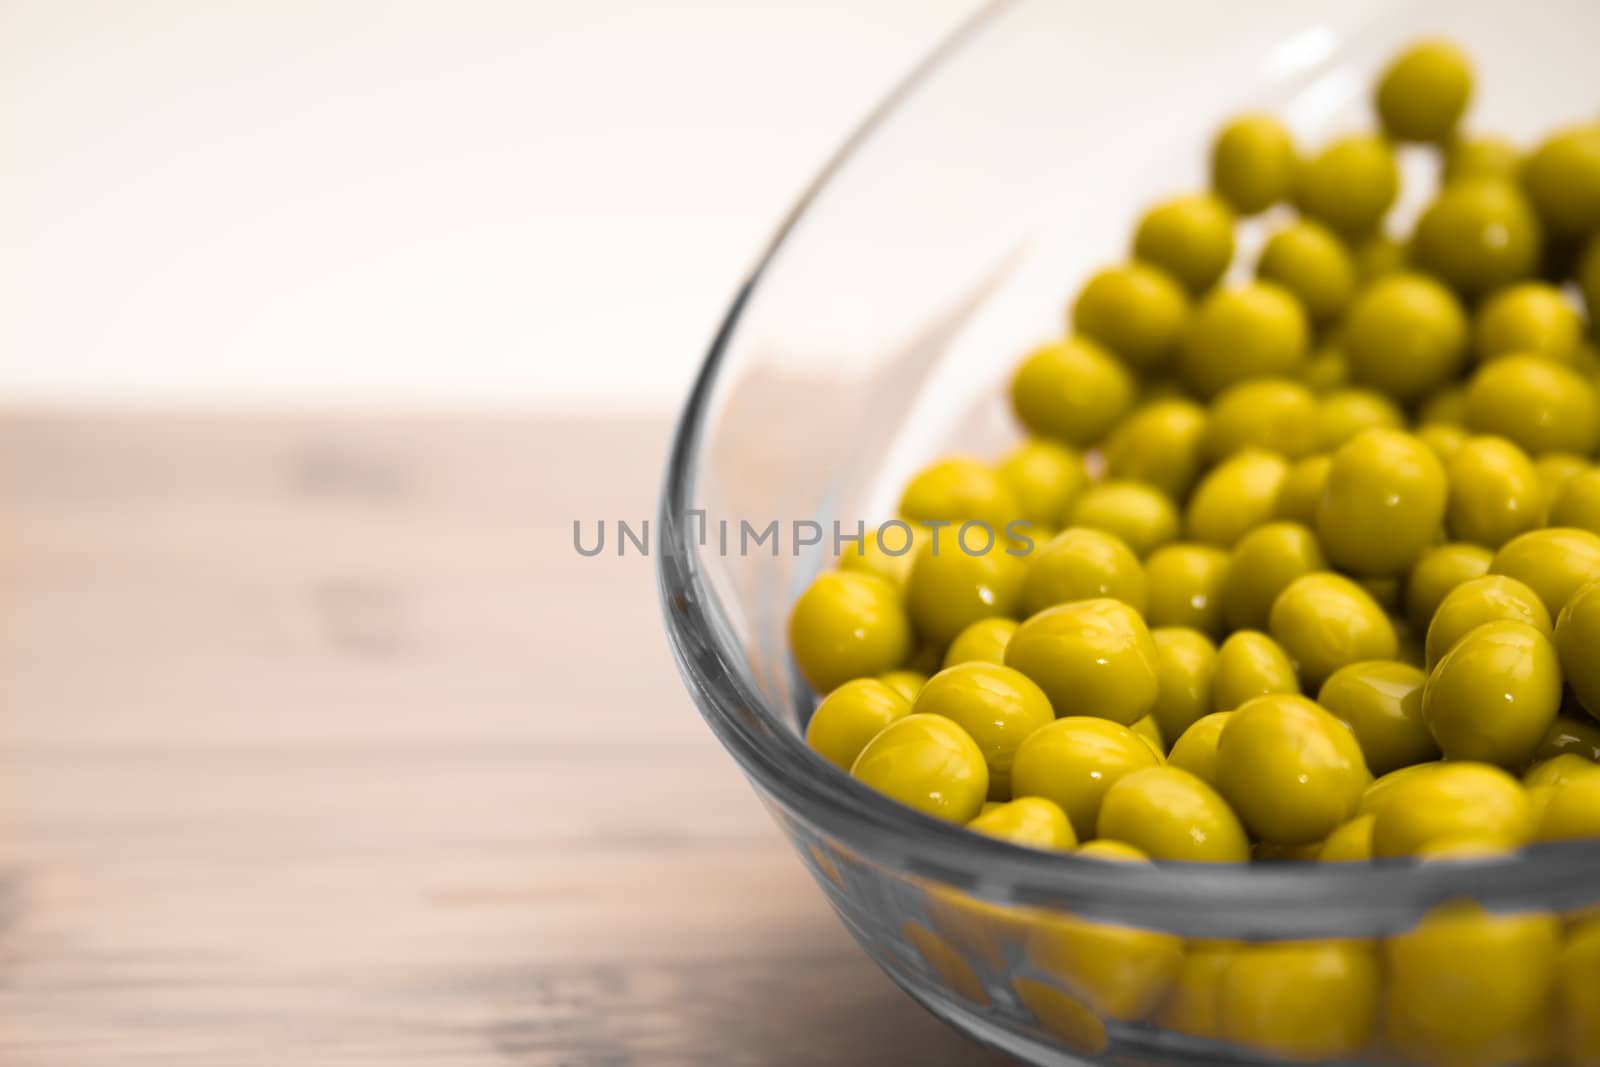 peas in a glass bowl by nubephoto